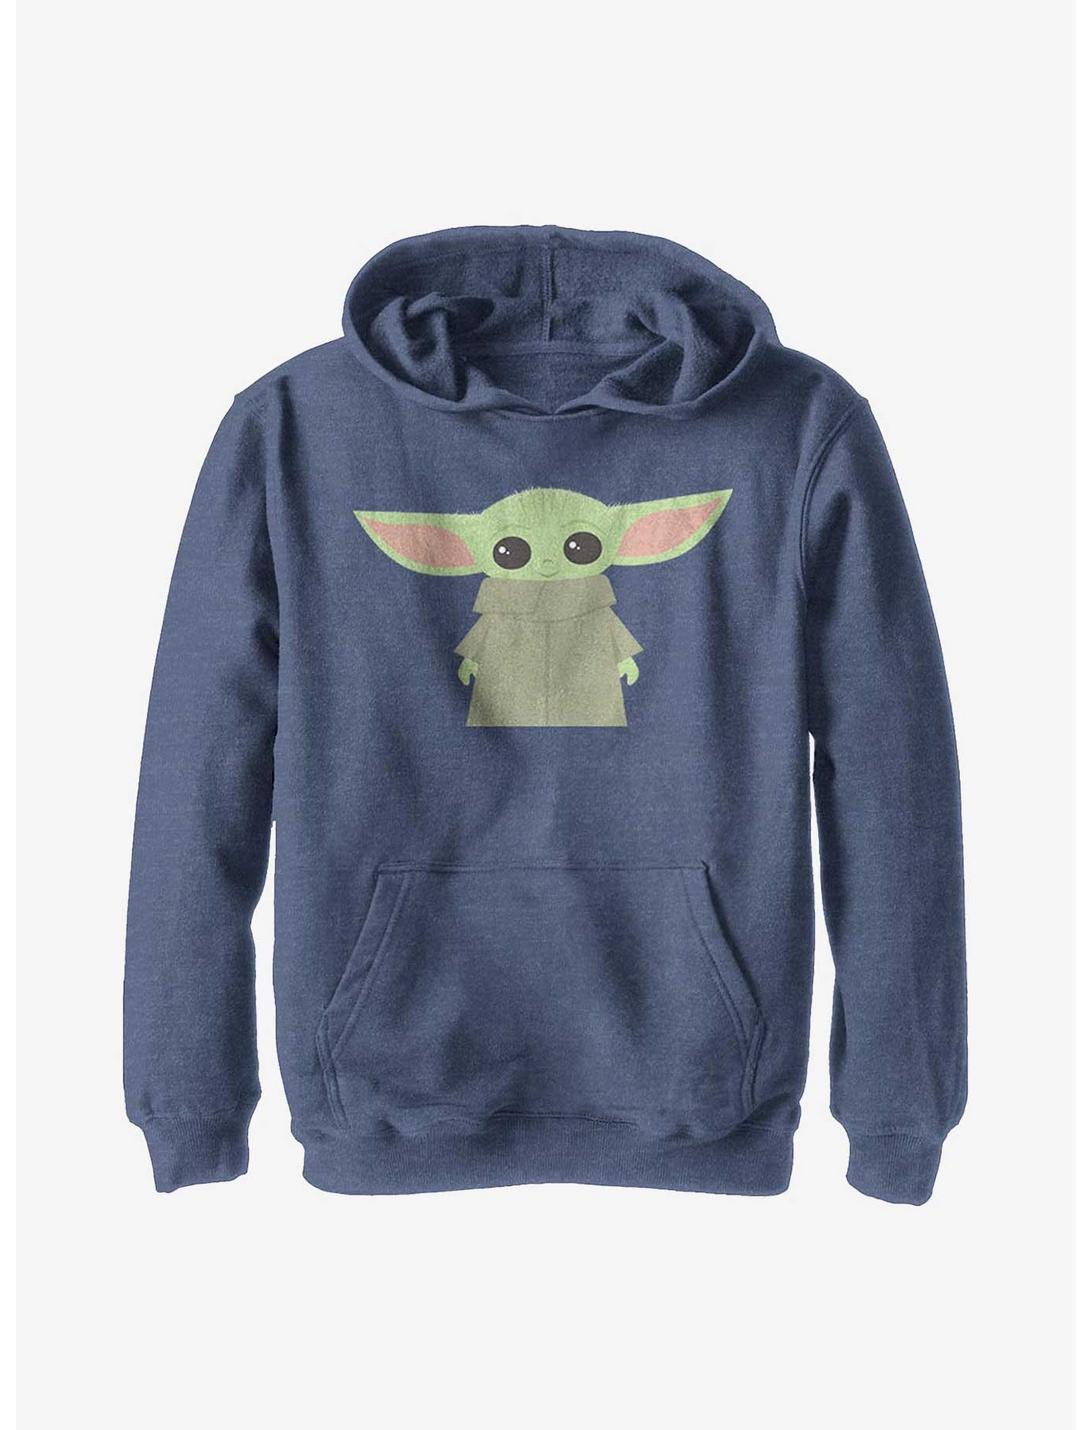 Star Wars The Mandalorian Simple The Child Youth Hoodie, NAVY HTR, hi-res